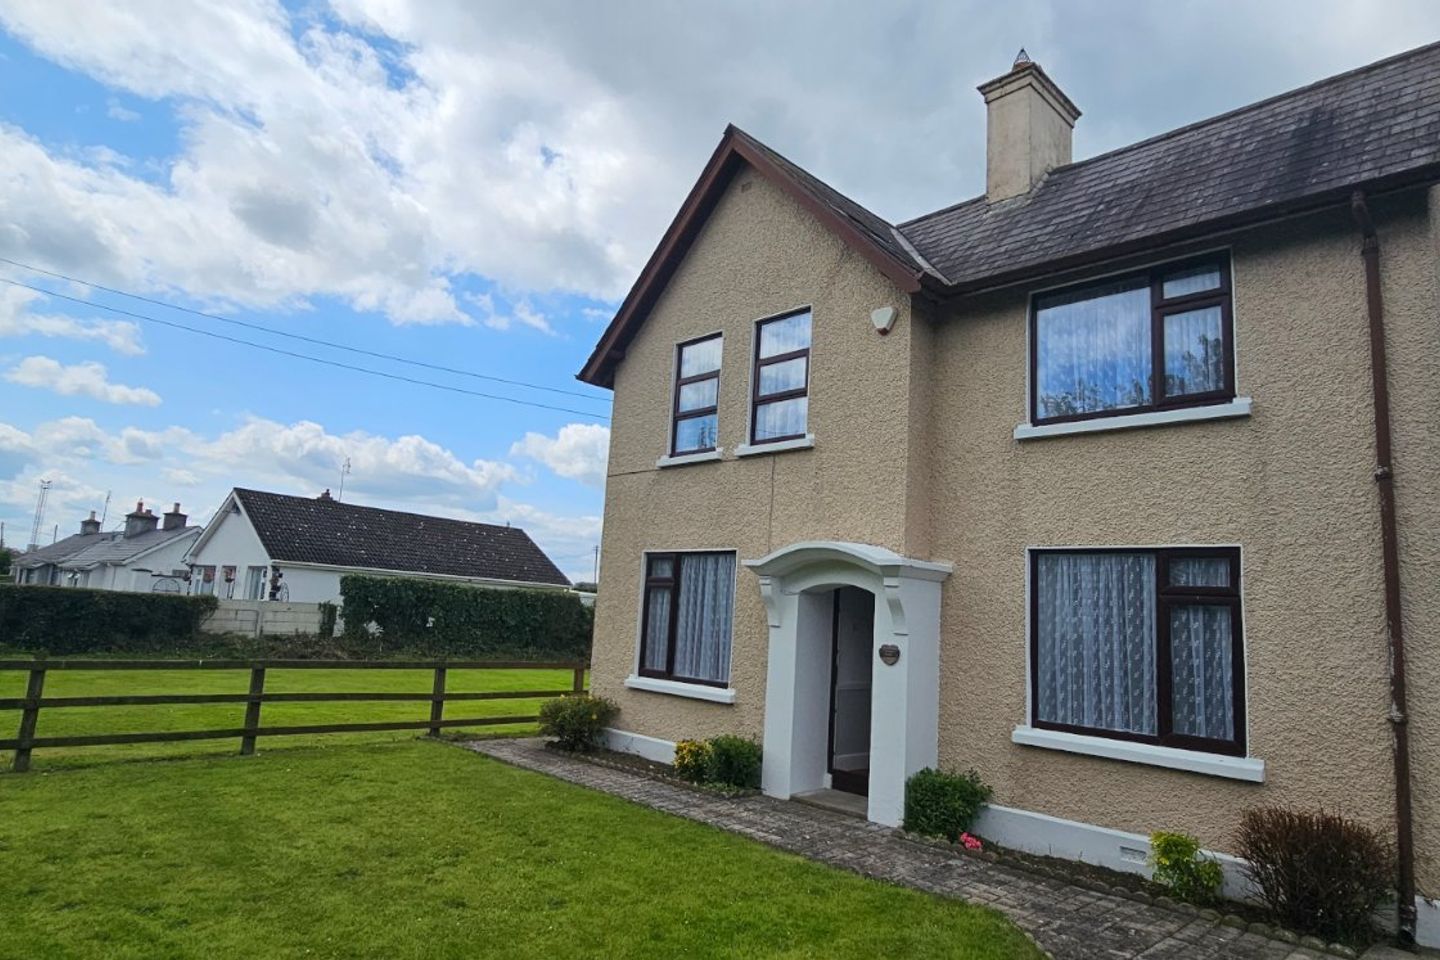 Conniberry House, Old Knockmay Road, Portlaoise, Co. Laois